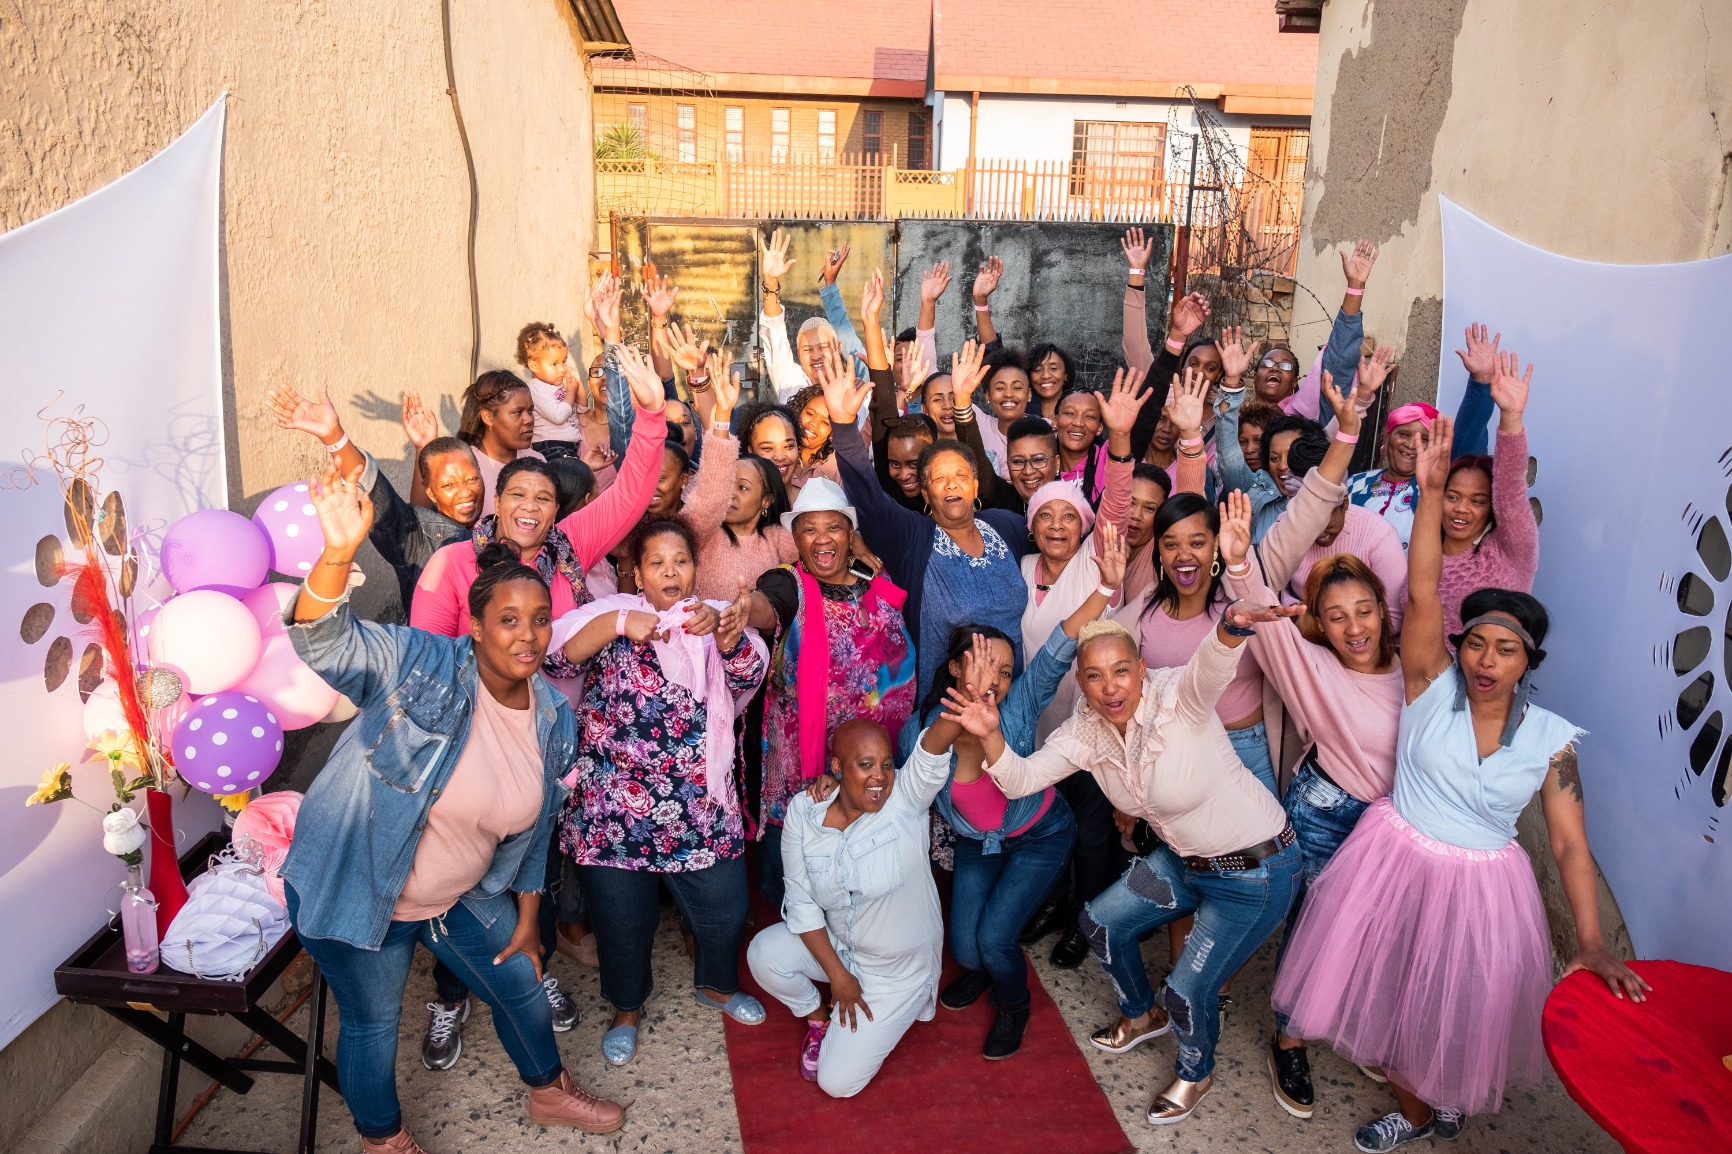 Photo of women dressed in pink for Westbury women's event. Women have their hands up and are all smiling. All women are people of colour.